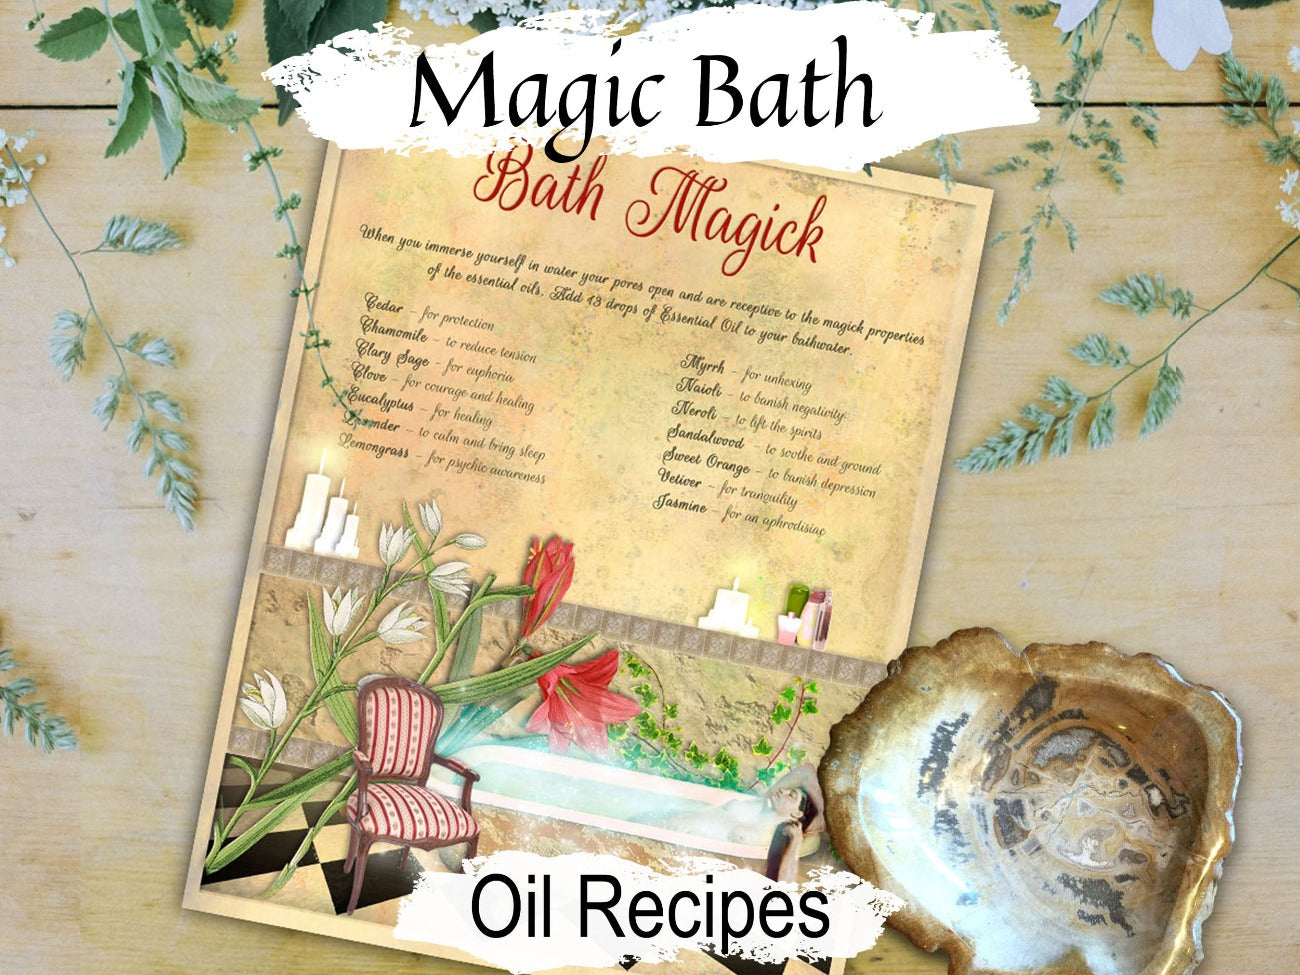 BATH MAGICK, Printable Ritual Bath Essential Oil Recipes, Wicca Aromatherapy Bath Oils for Cleansing, Purification and Spiritual Awareness - Morgana Magick Spell